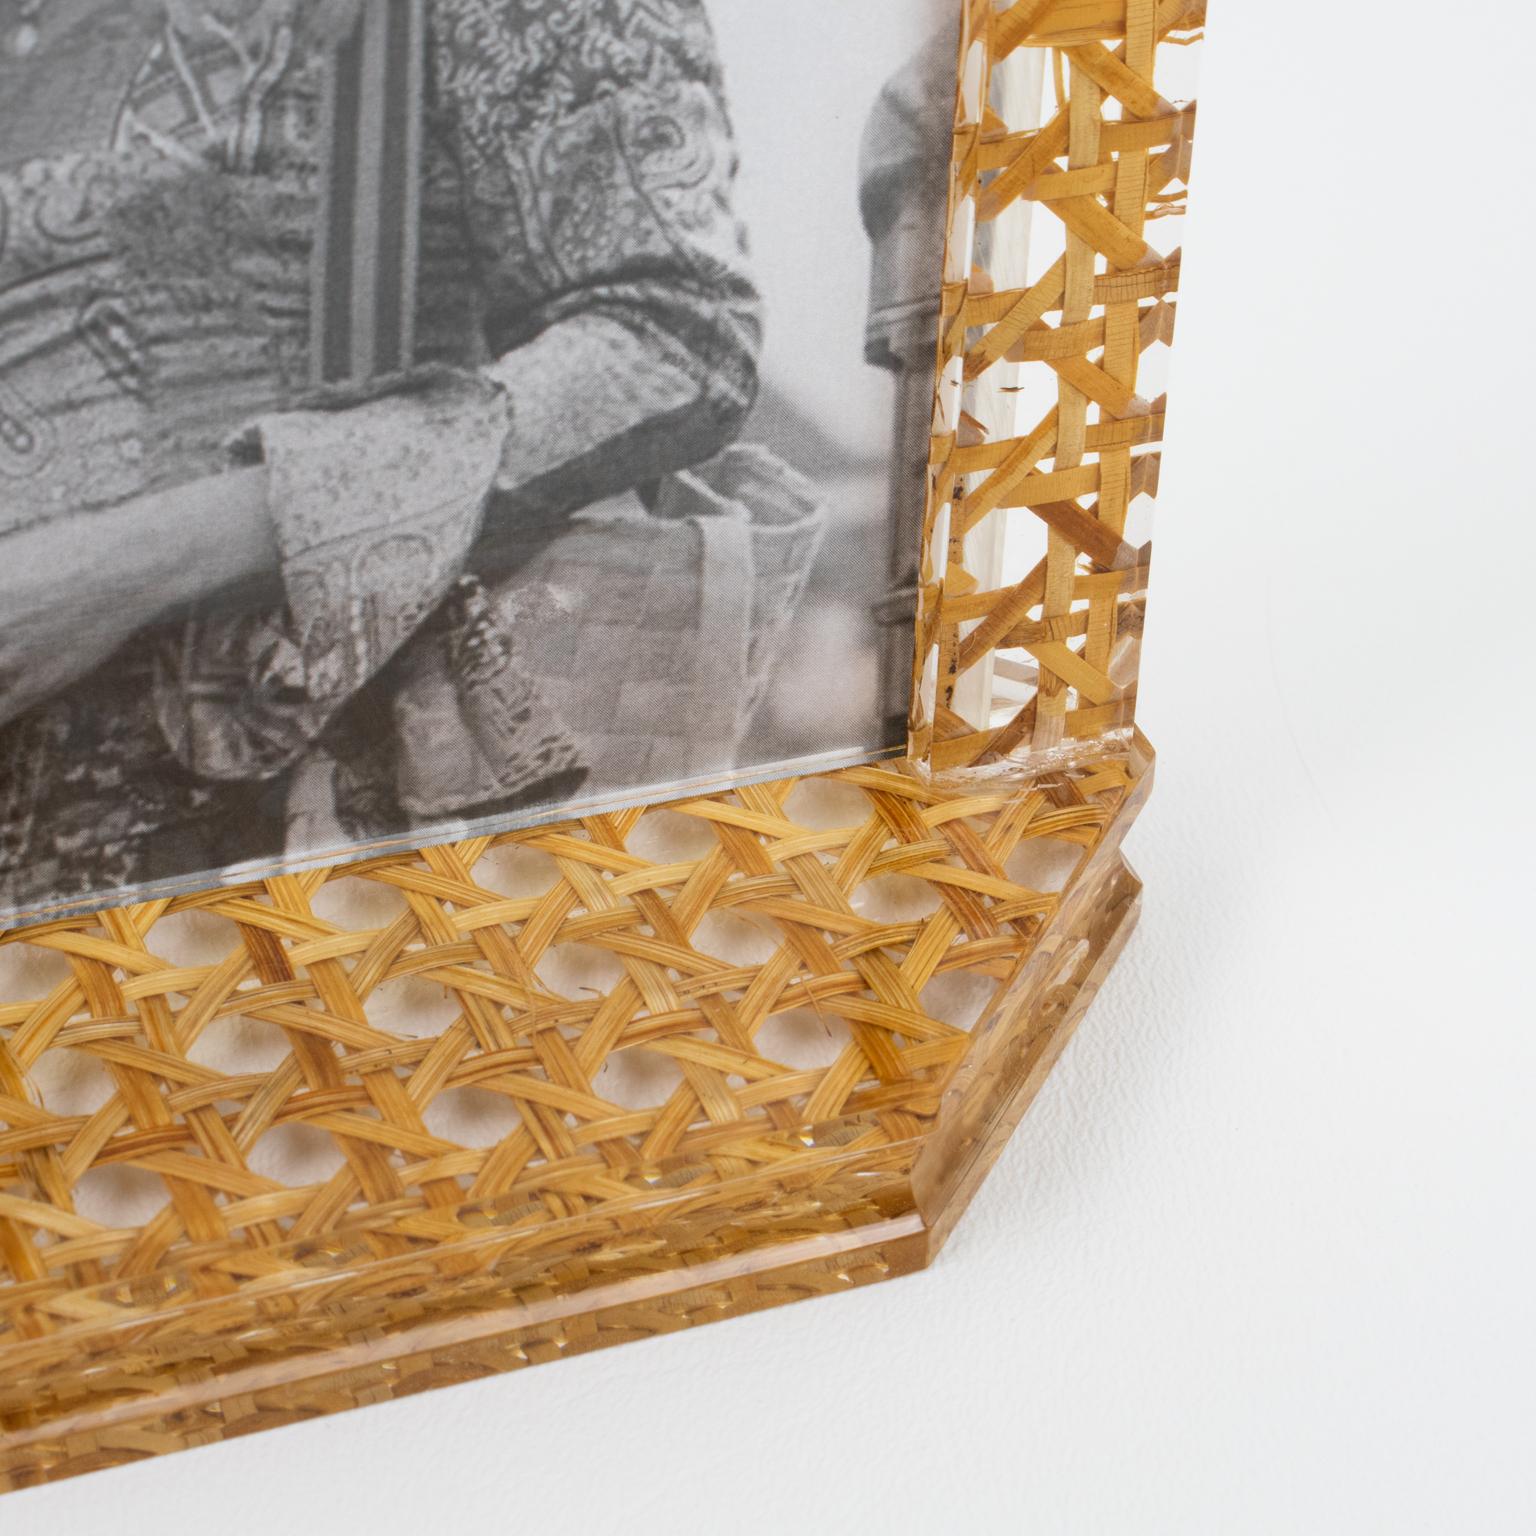 Lucite, Rattan, Wicker Picture Frame, Italy 1970s In Excellent Condition For Sale In Atlanta, GA